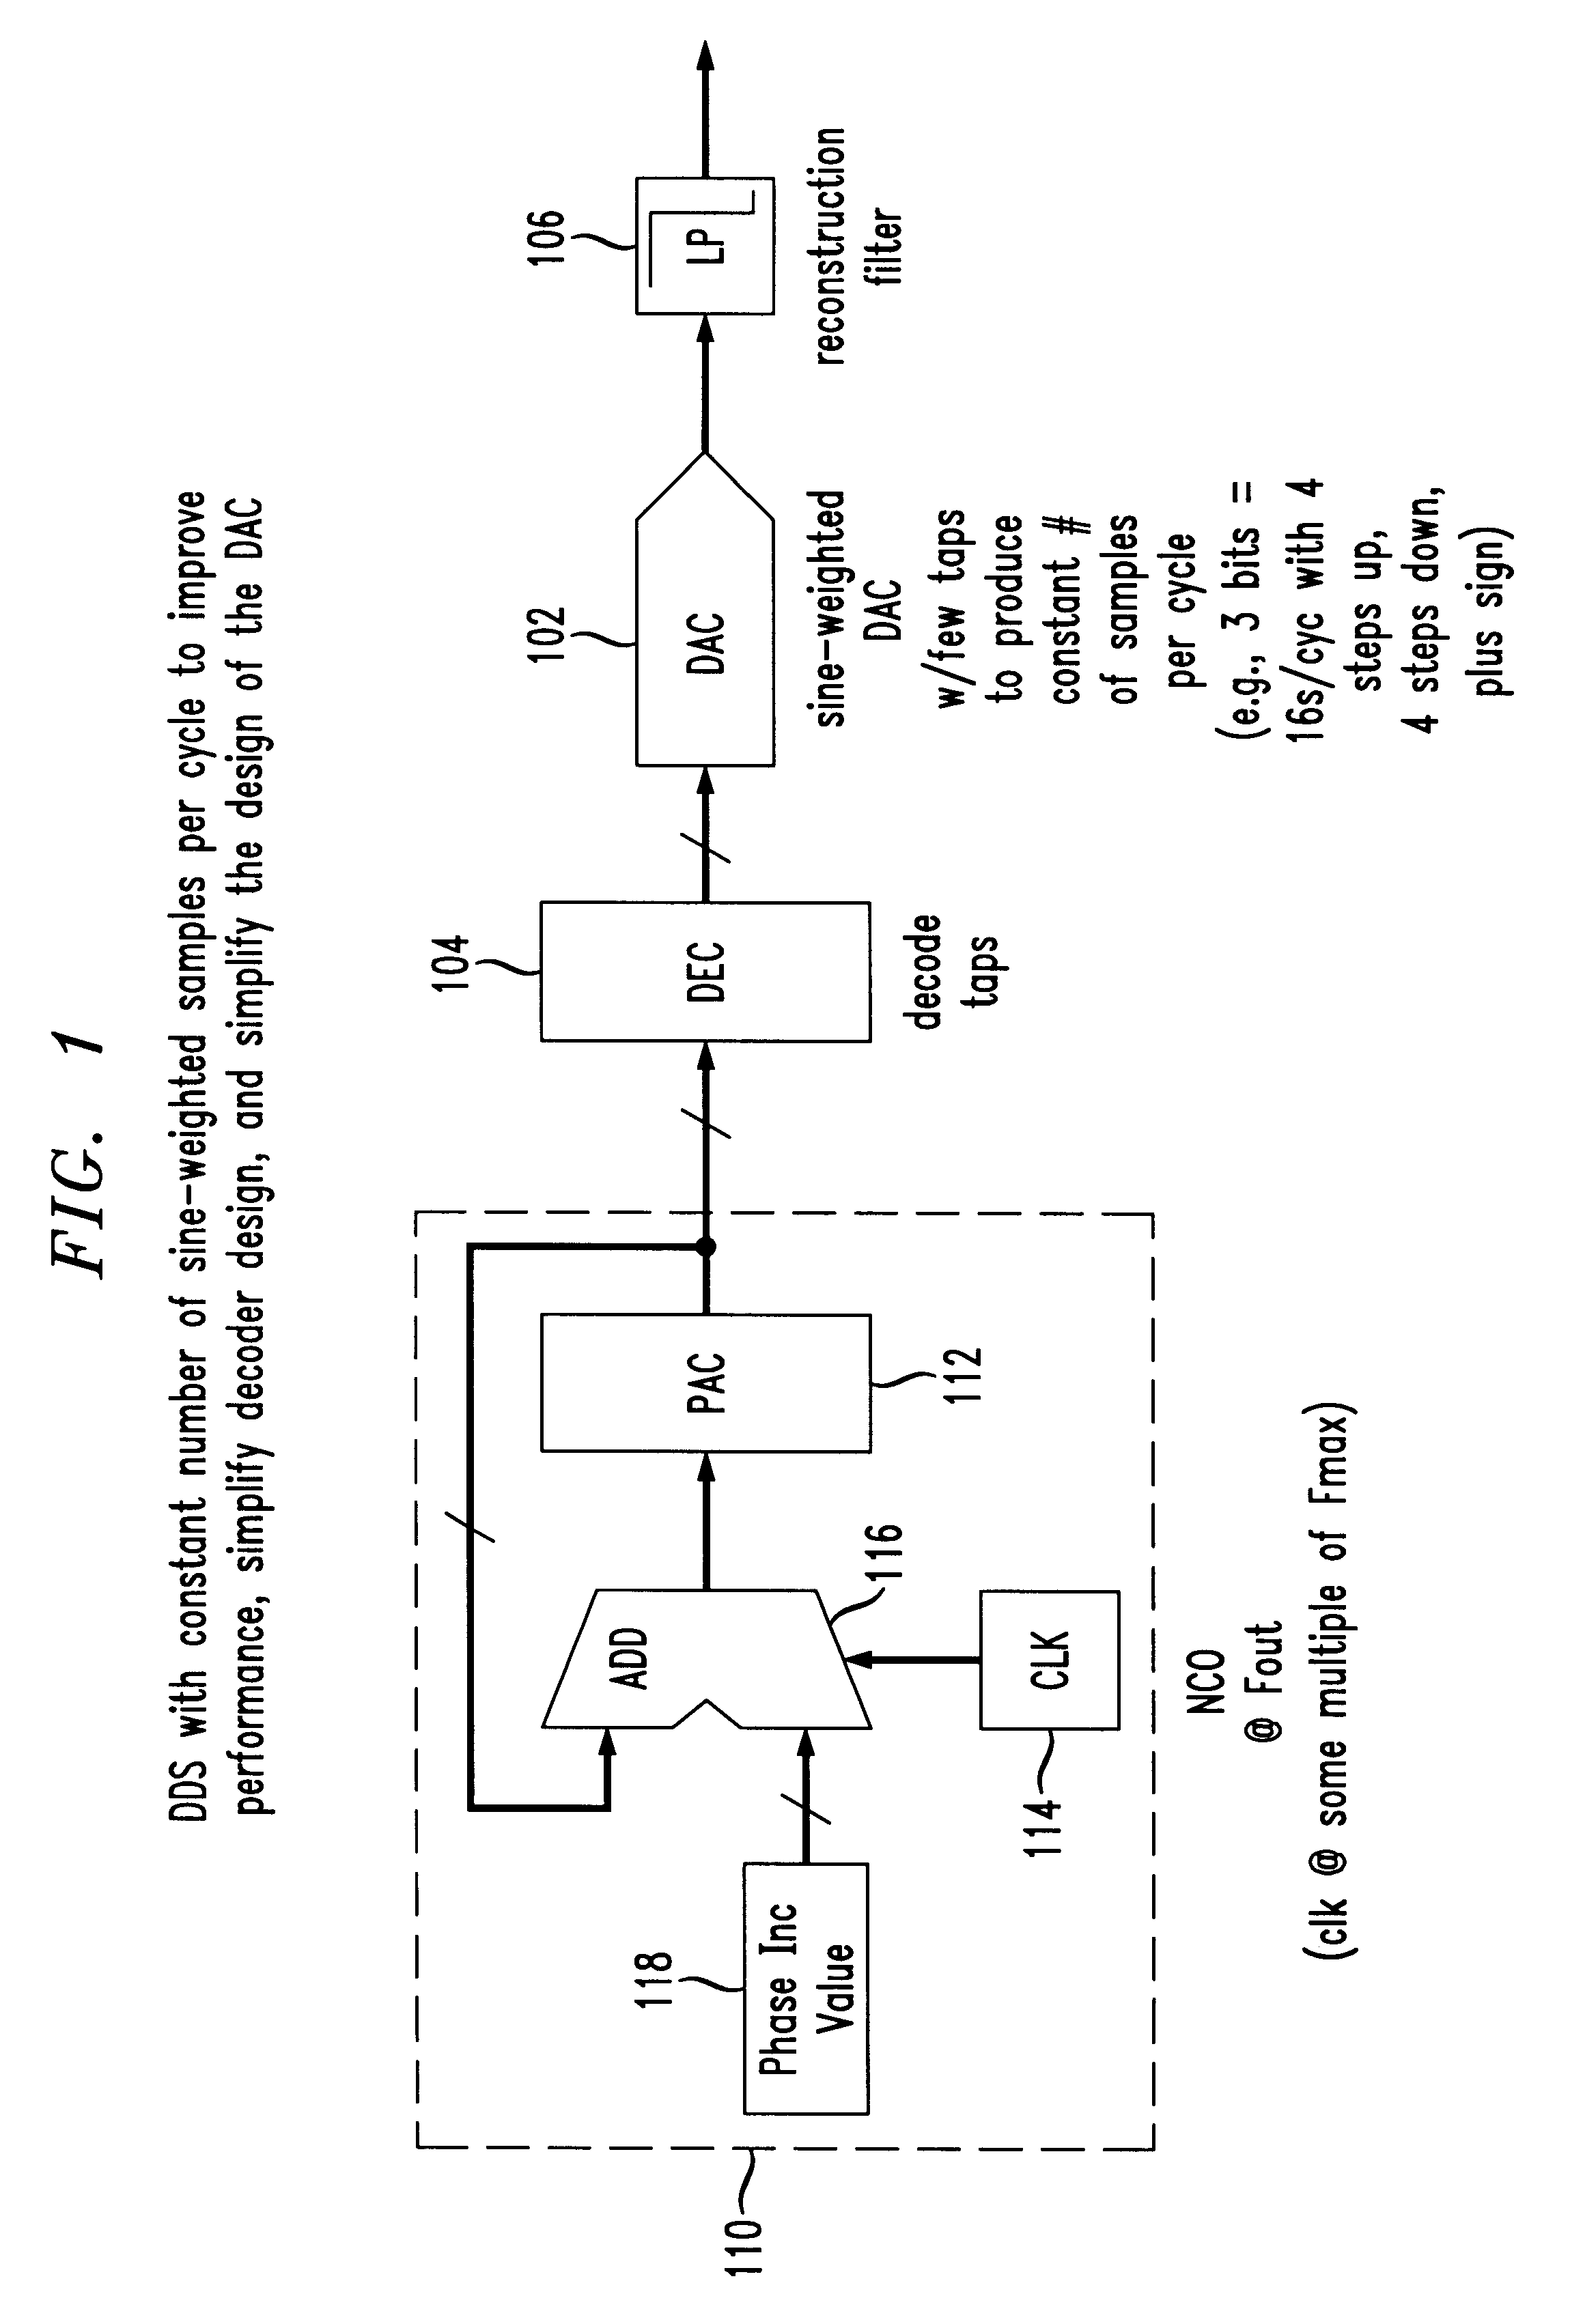 Direct digital synthesis using a sine weighted DAC